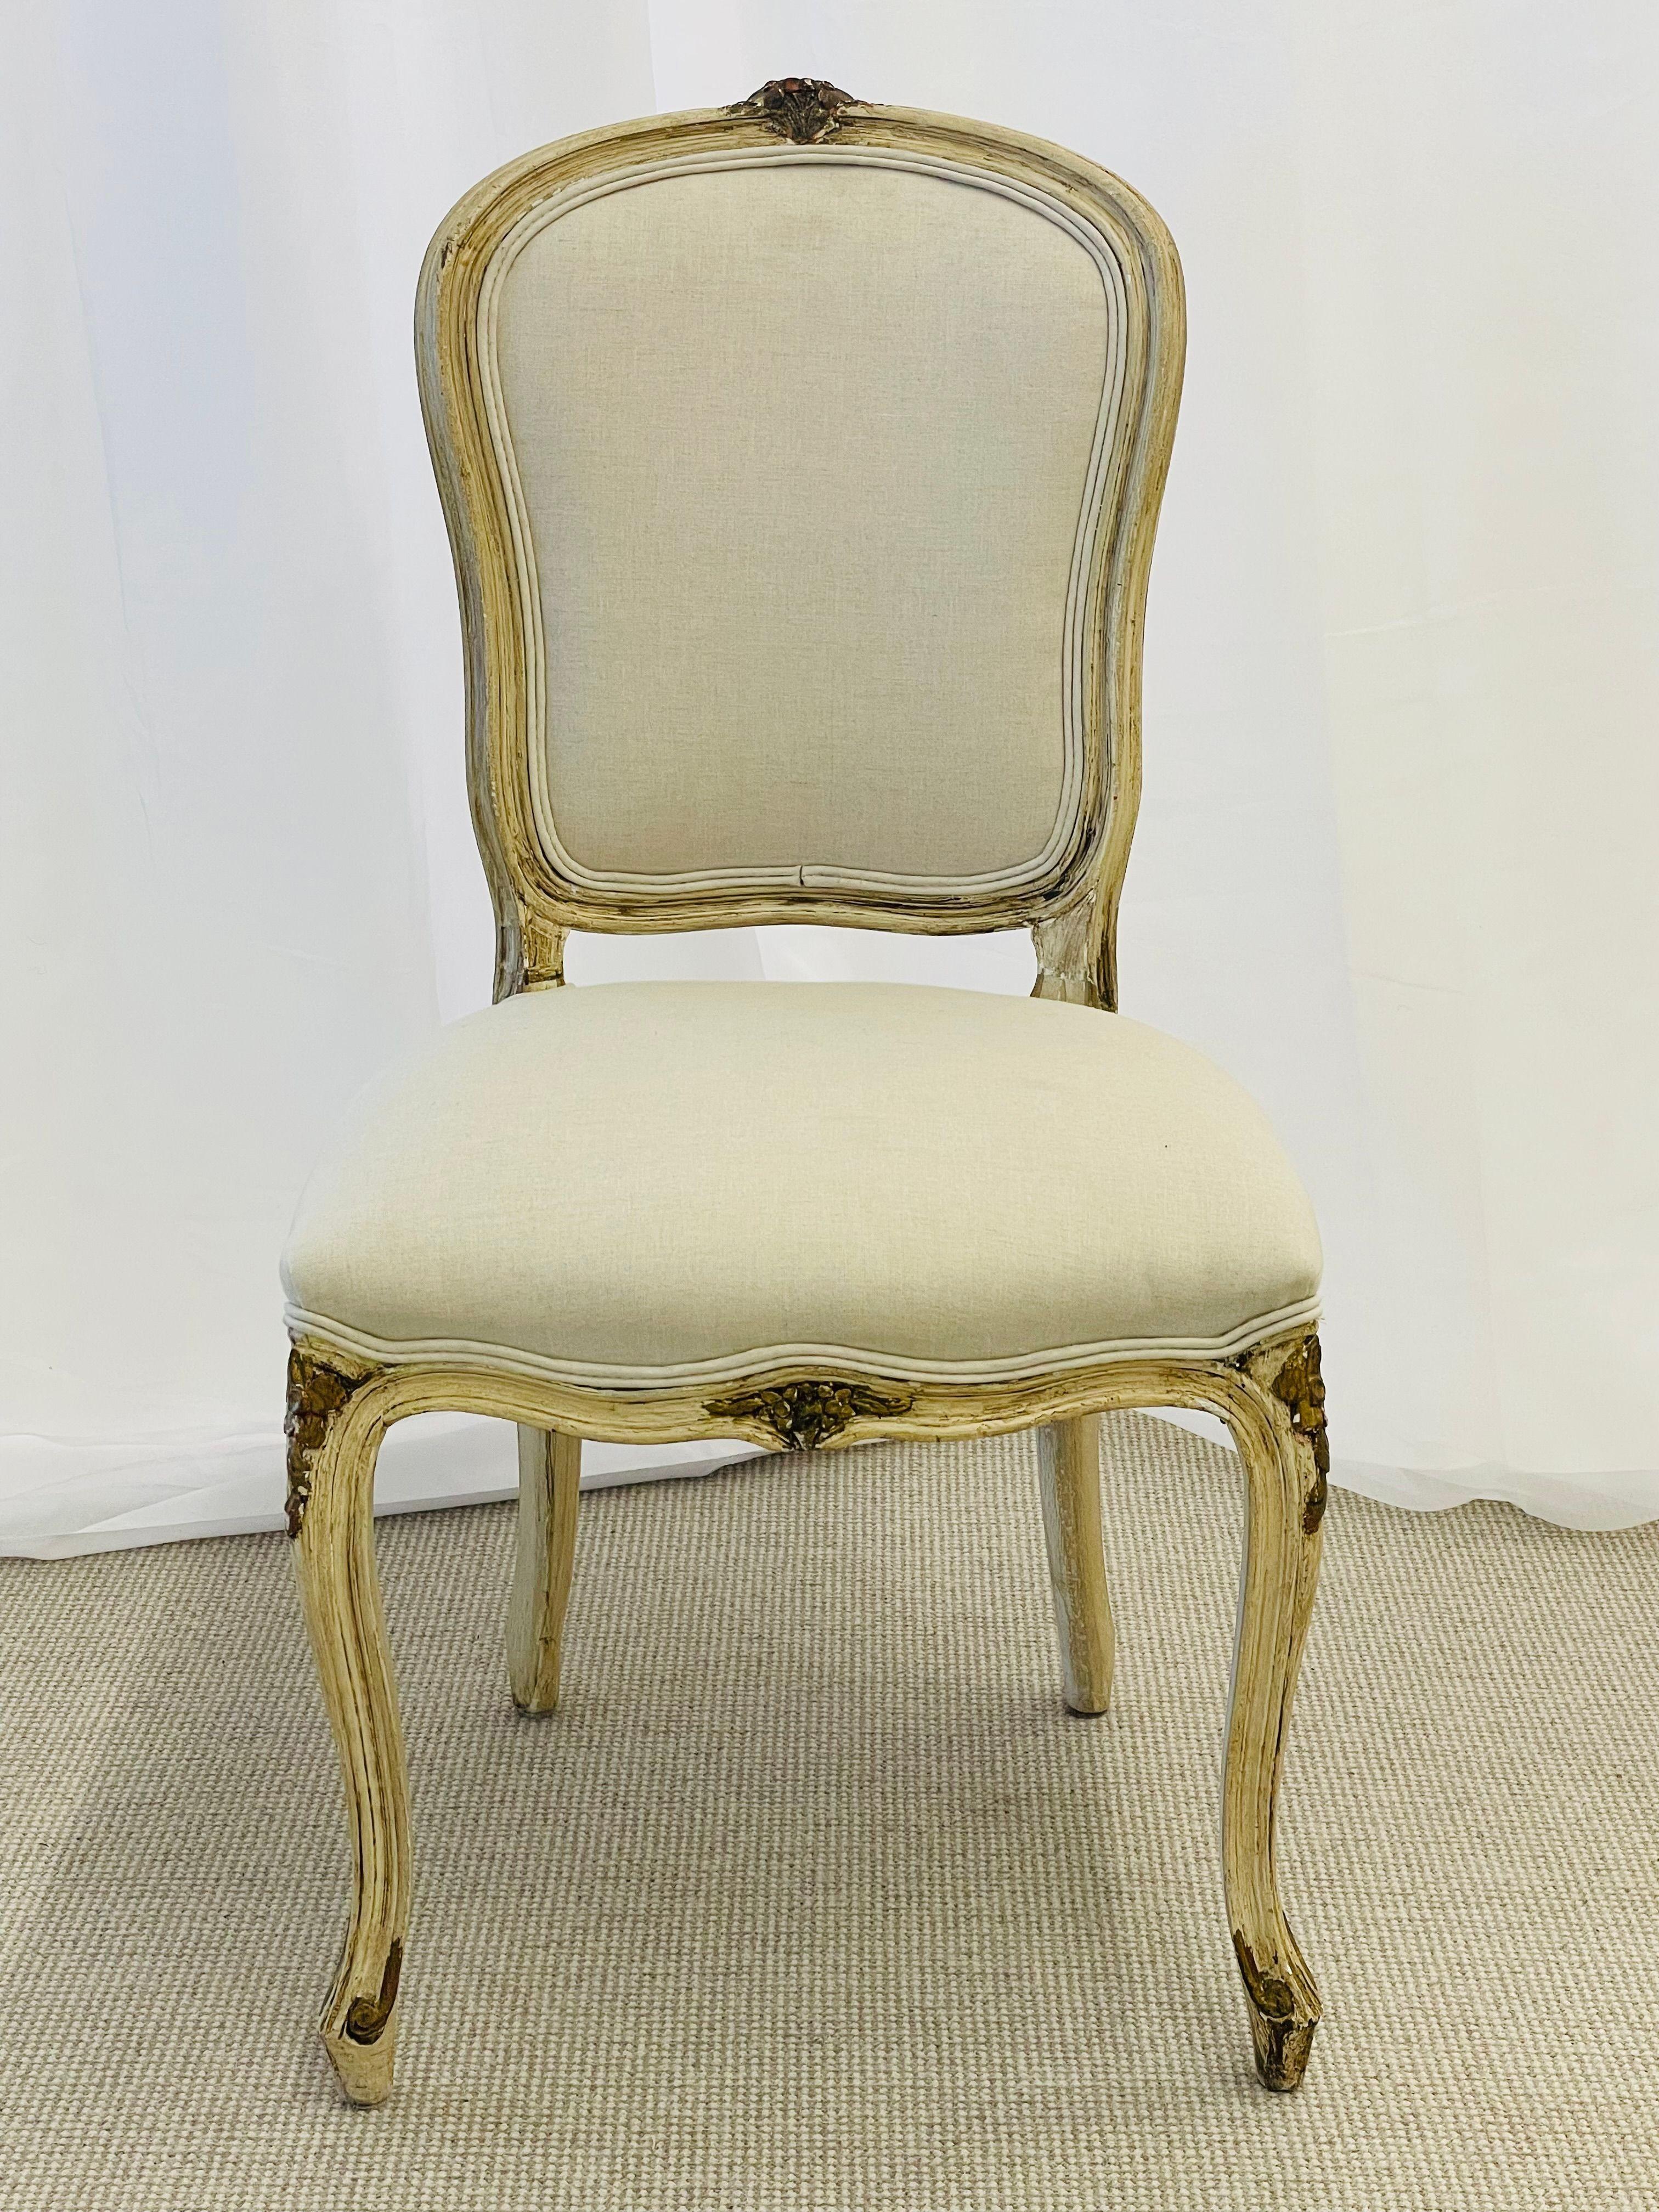 Mid-20th Century Maison Jansen, Gustavian, Dining Chairs, Ivory Painted Wood, White Fabric, 1940s For Sale